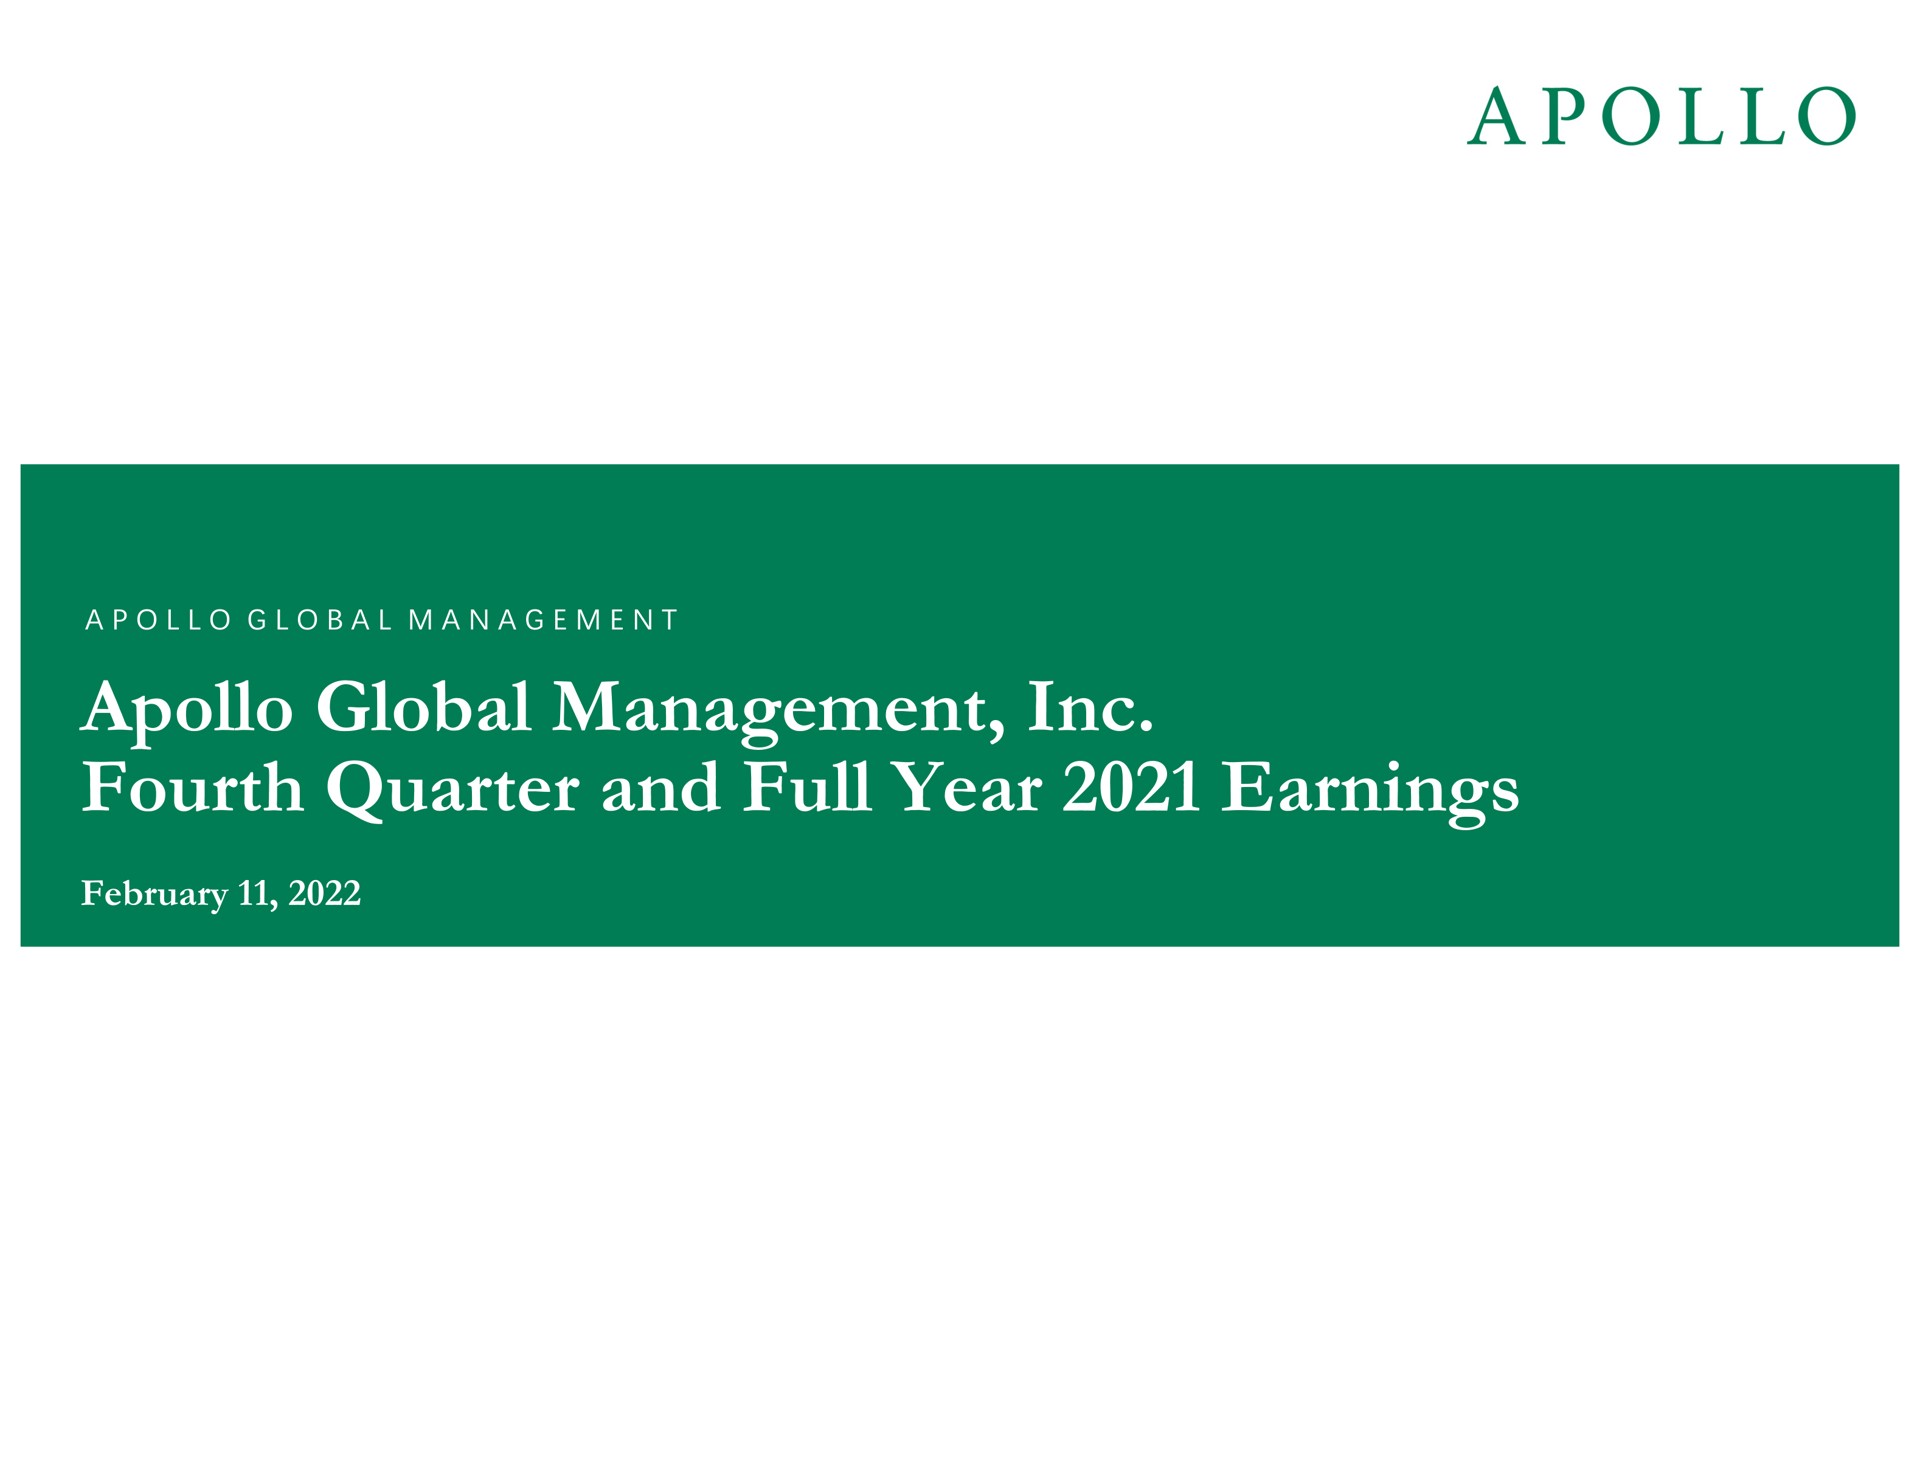 global management fourth quarter and full year earnings | Apollo Global Management